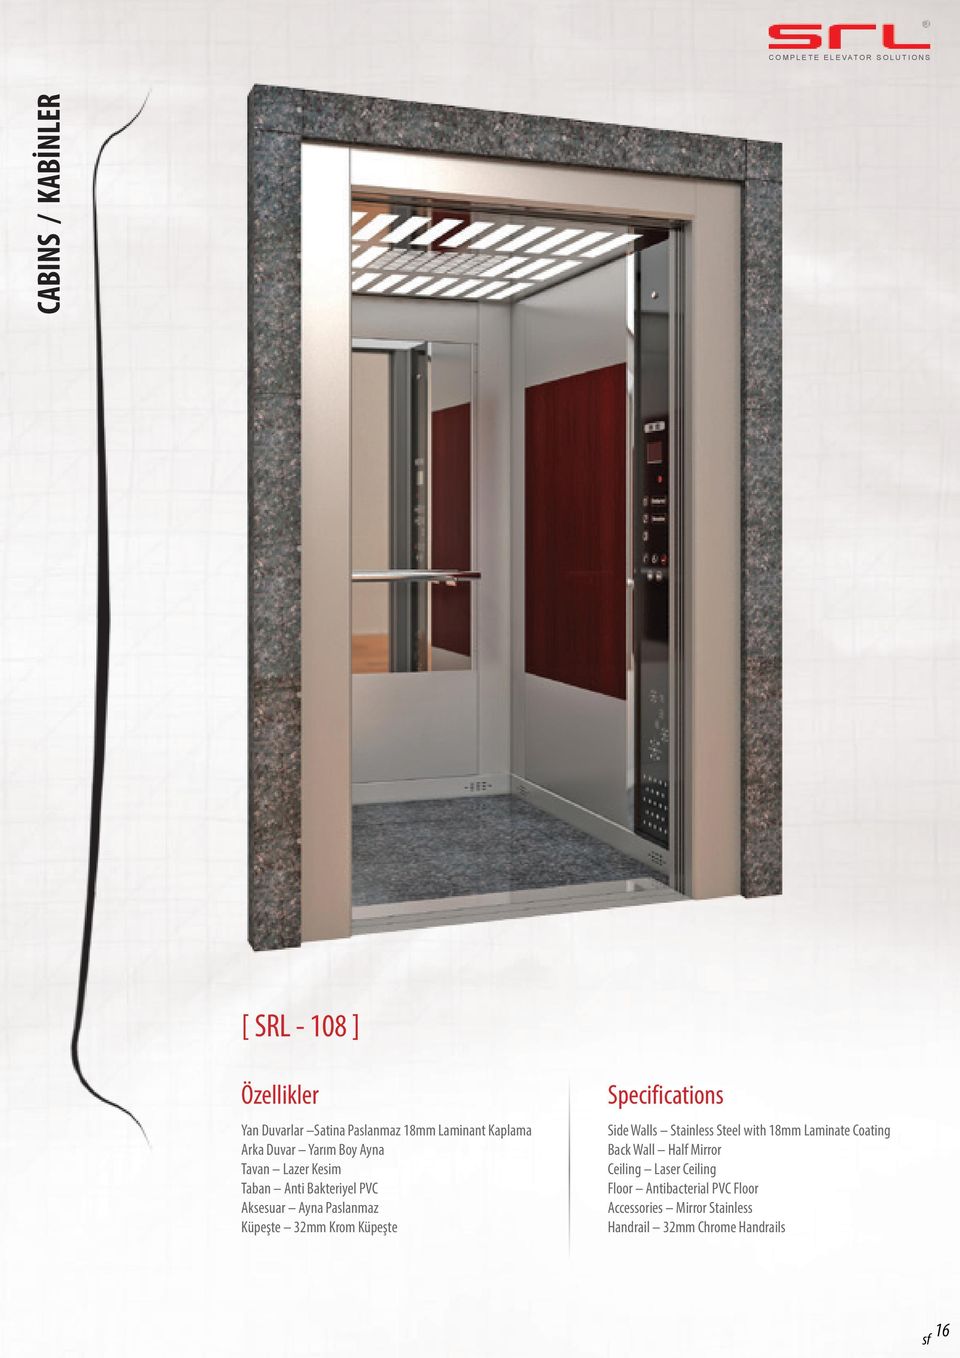 Küpeşte Specifications Side Walls Stainless Steel with 18mm Laminate Coating Back Wall Half Mirror